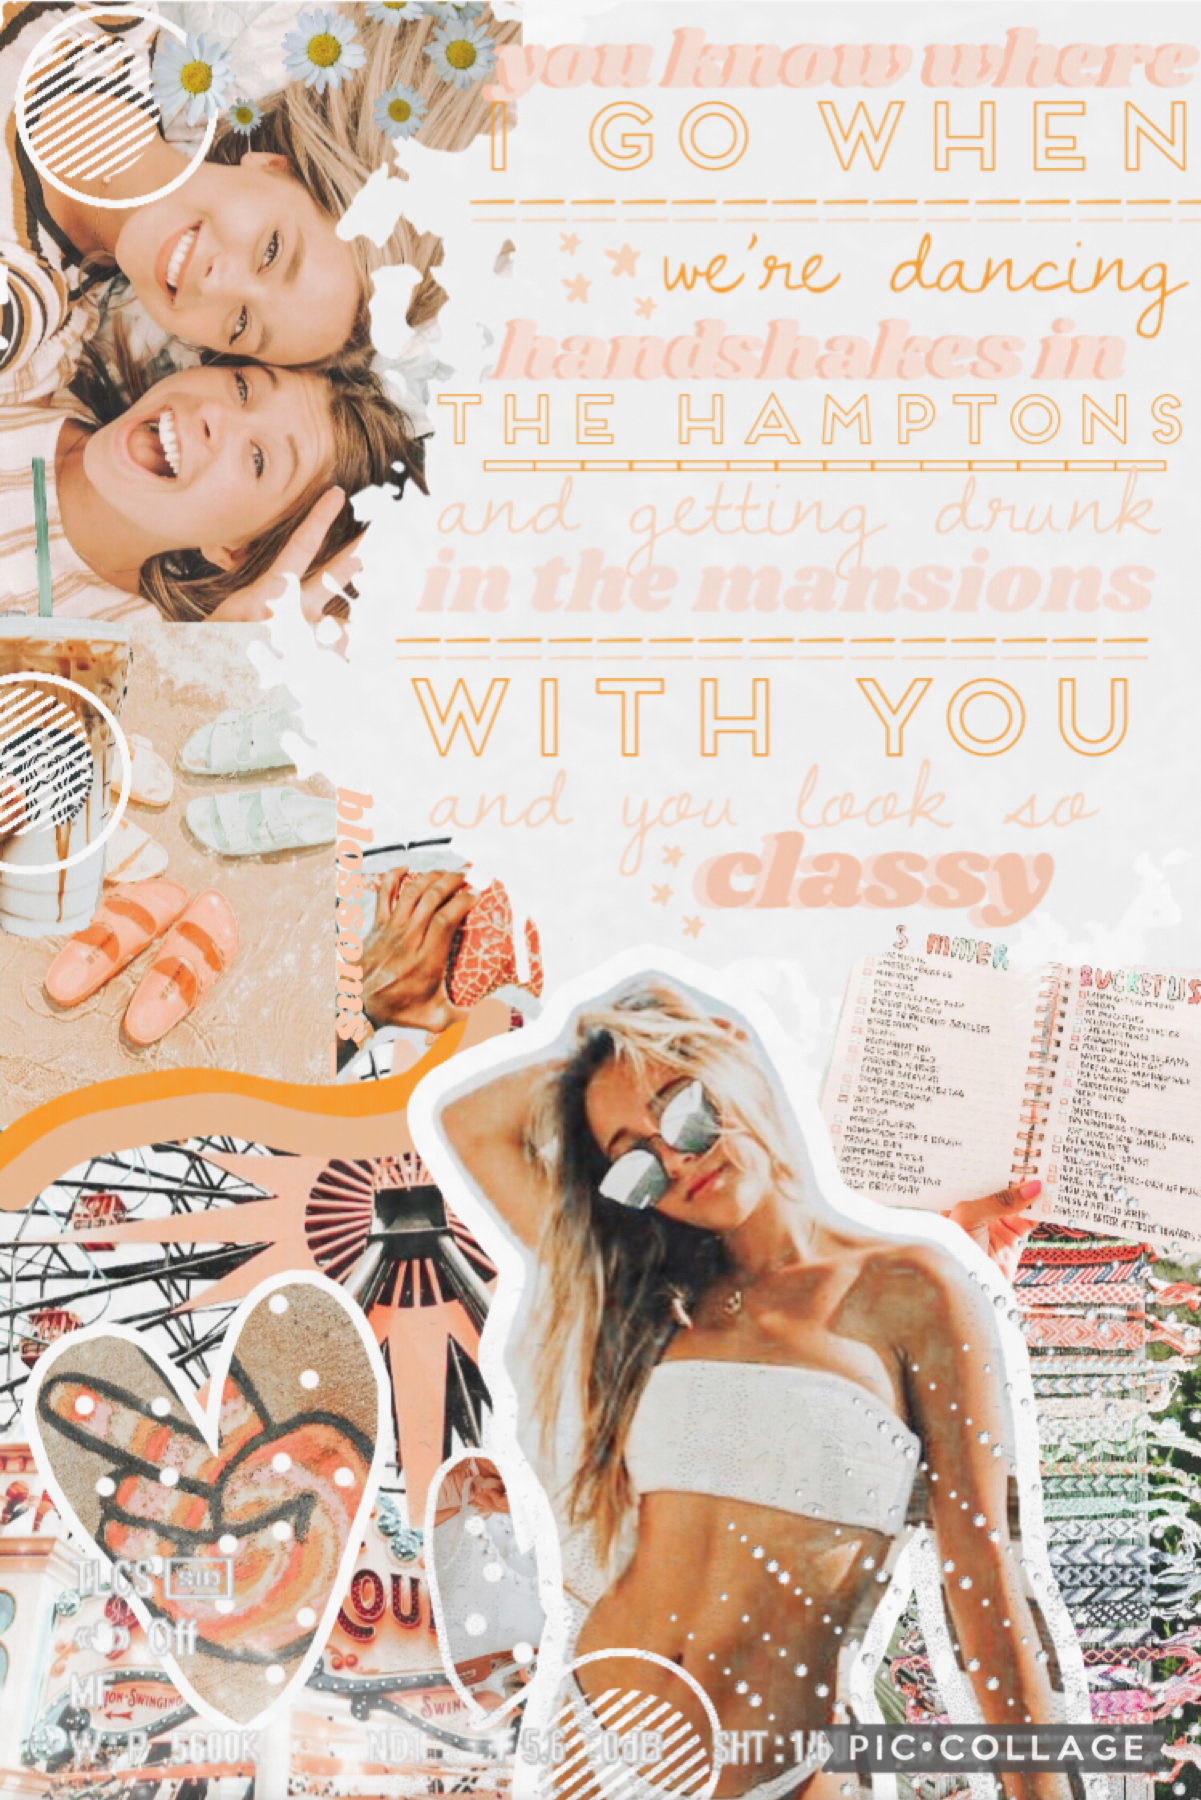 🌟 t a p 🌟 
not me posting the wrong collage before 🙊 lol 😀 anyways, NEW THEME!! it’s very peachy/summery. It’s also giving 2019 pc vibes (not complaining abt that tho) QOTD: what’s ur most commonly used emoji? AOTD: 👍